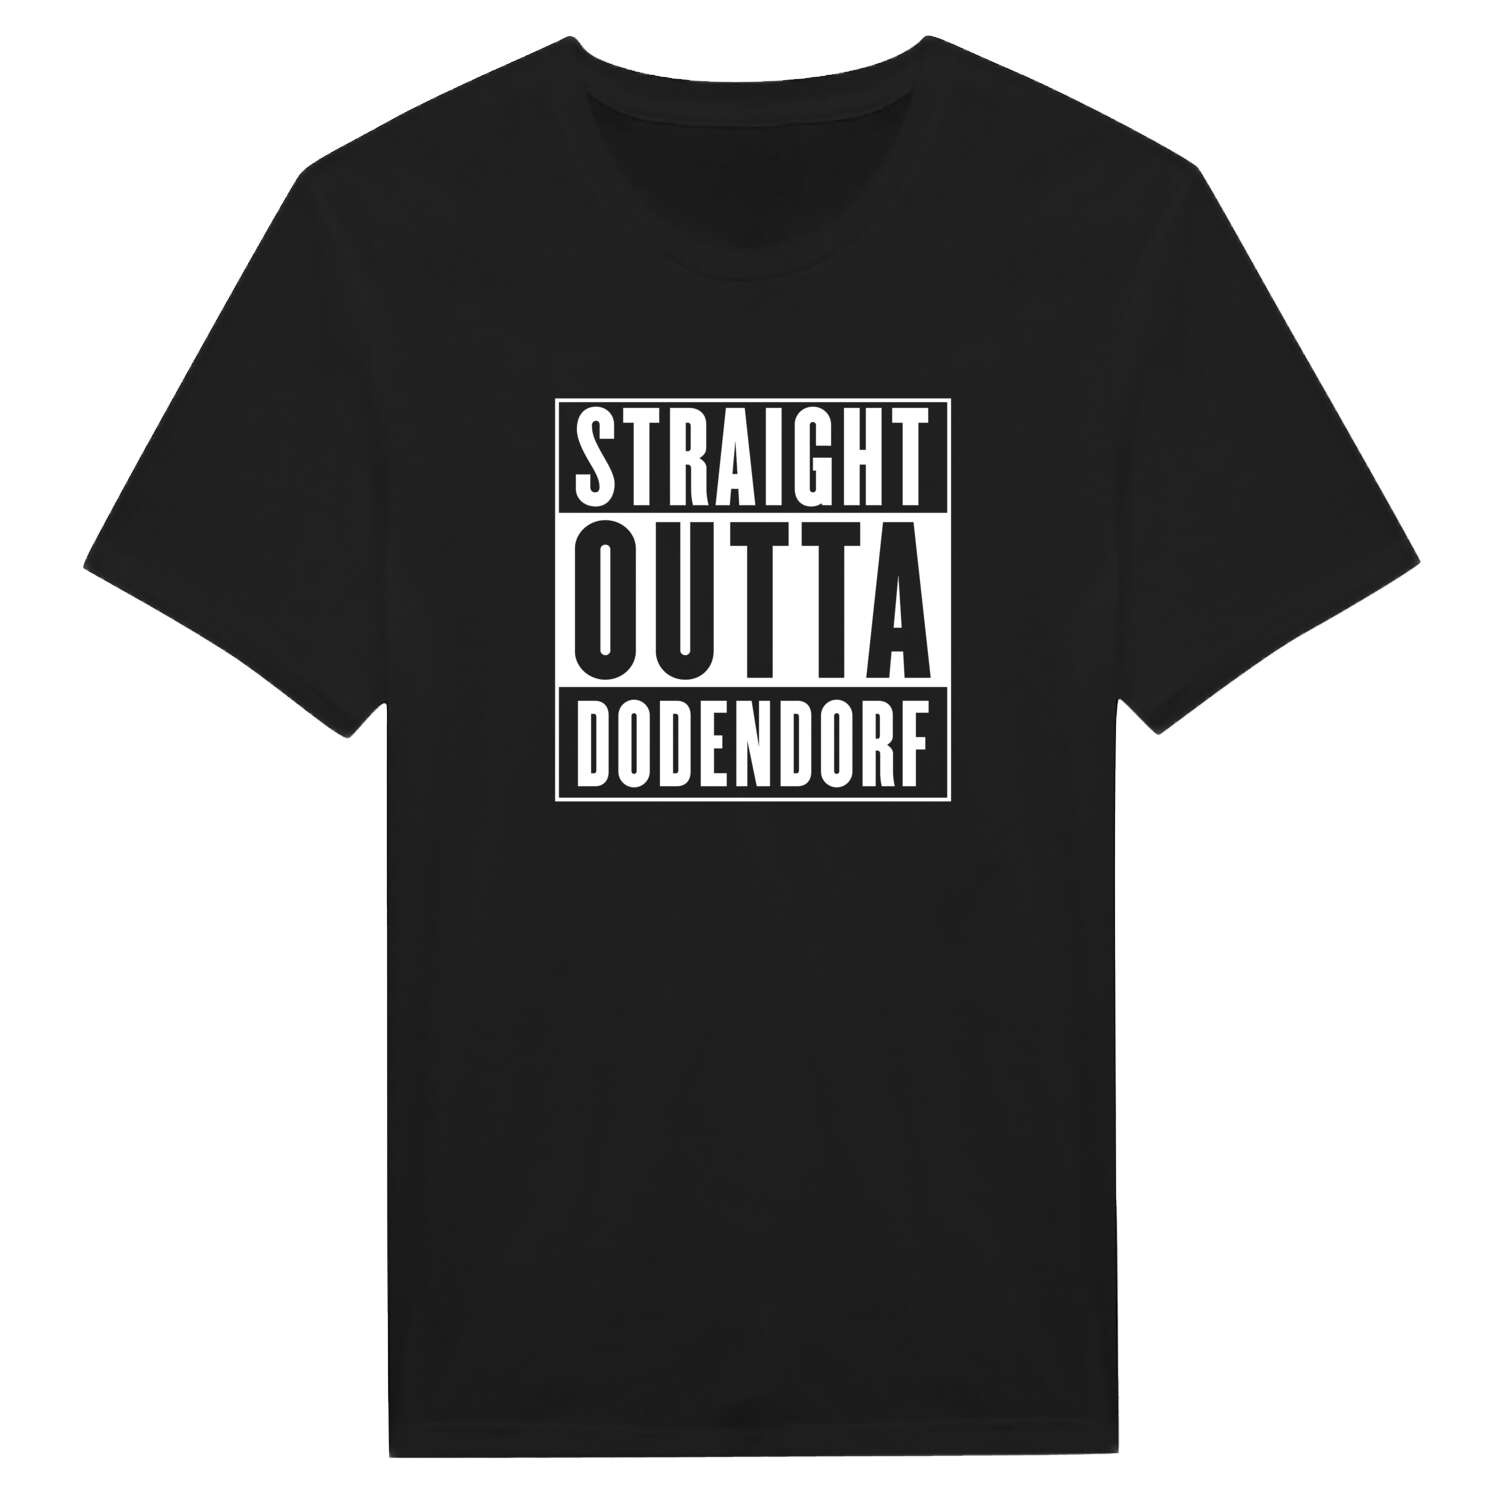 Dodendorf T-Shirt »Straight Outta«